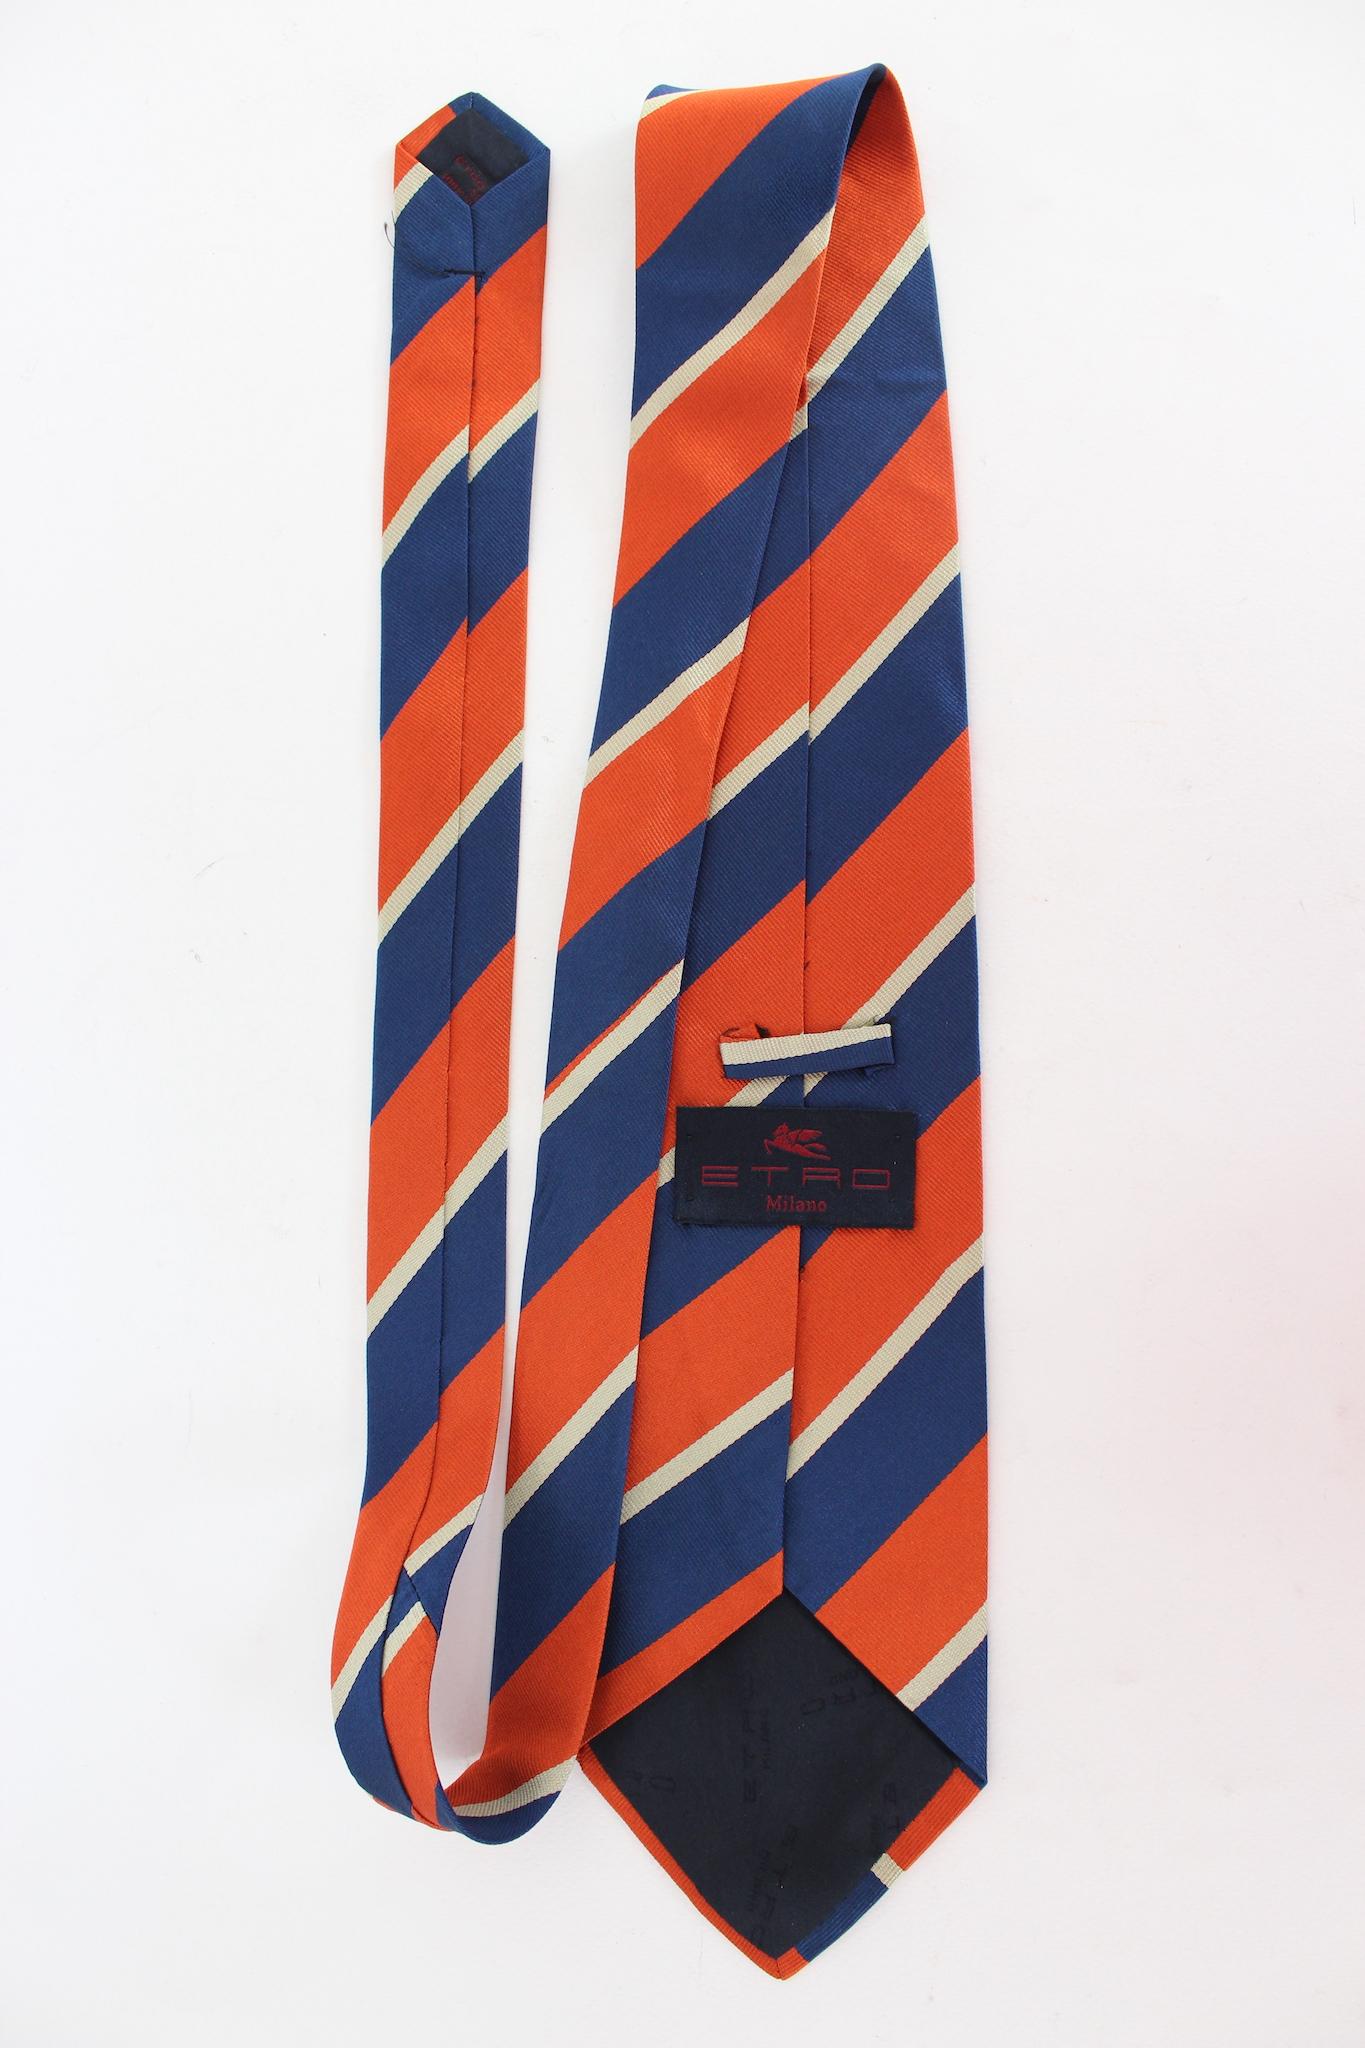 Etro vintage tie from the 2000s. Orange and blue, striped pattern. 100% silk fabric. Made in Italy.

Length: 143 cm
Width: 10 cm